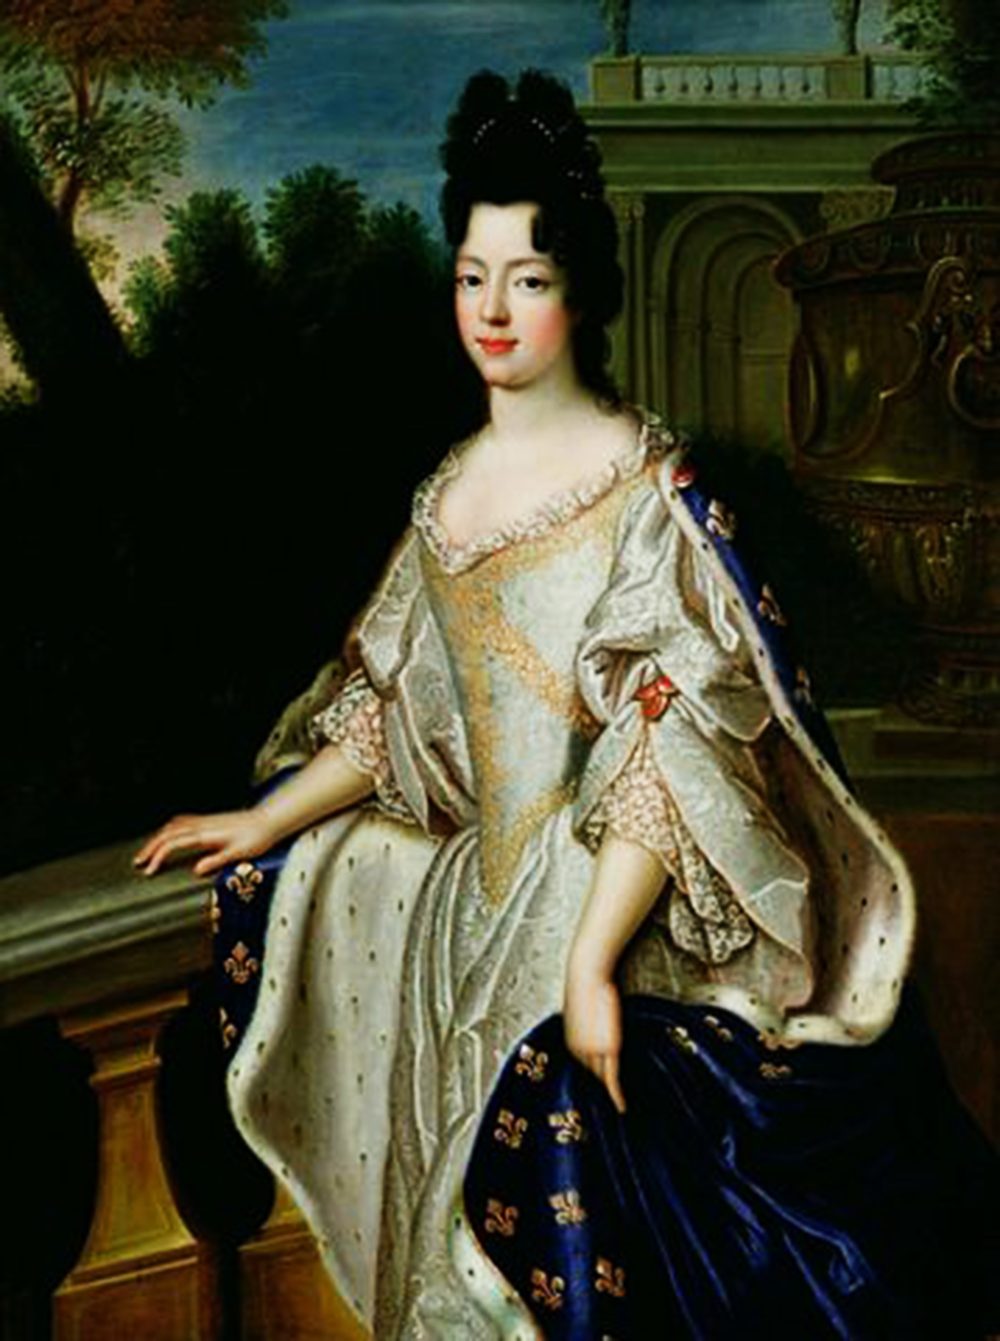 A portrait of a woman dressed in a very elaborate 17th century dress and a blue fur cape covered in fleur-de-lys symbols.